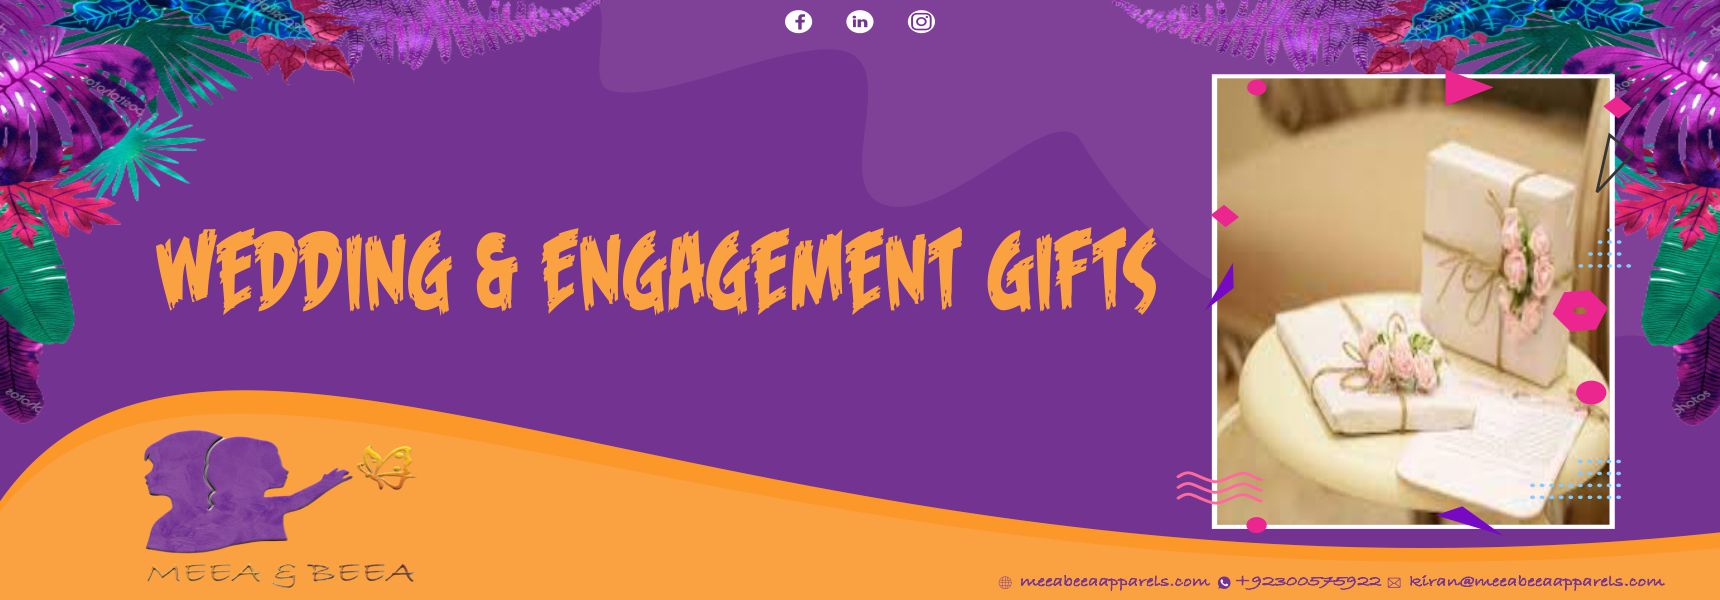 Wedding & Engagement Gifts